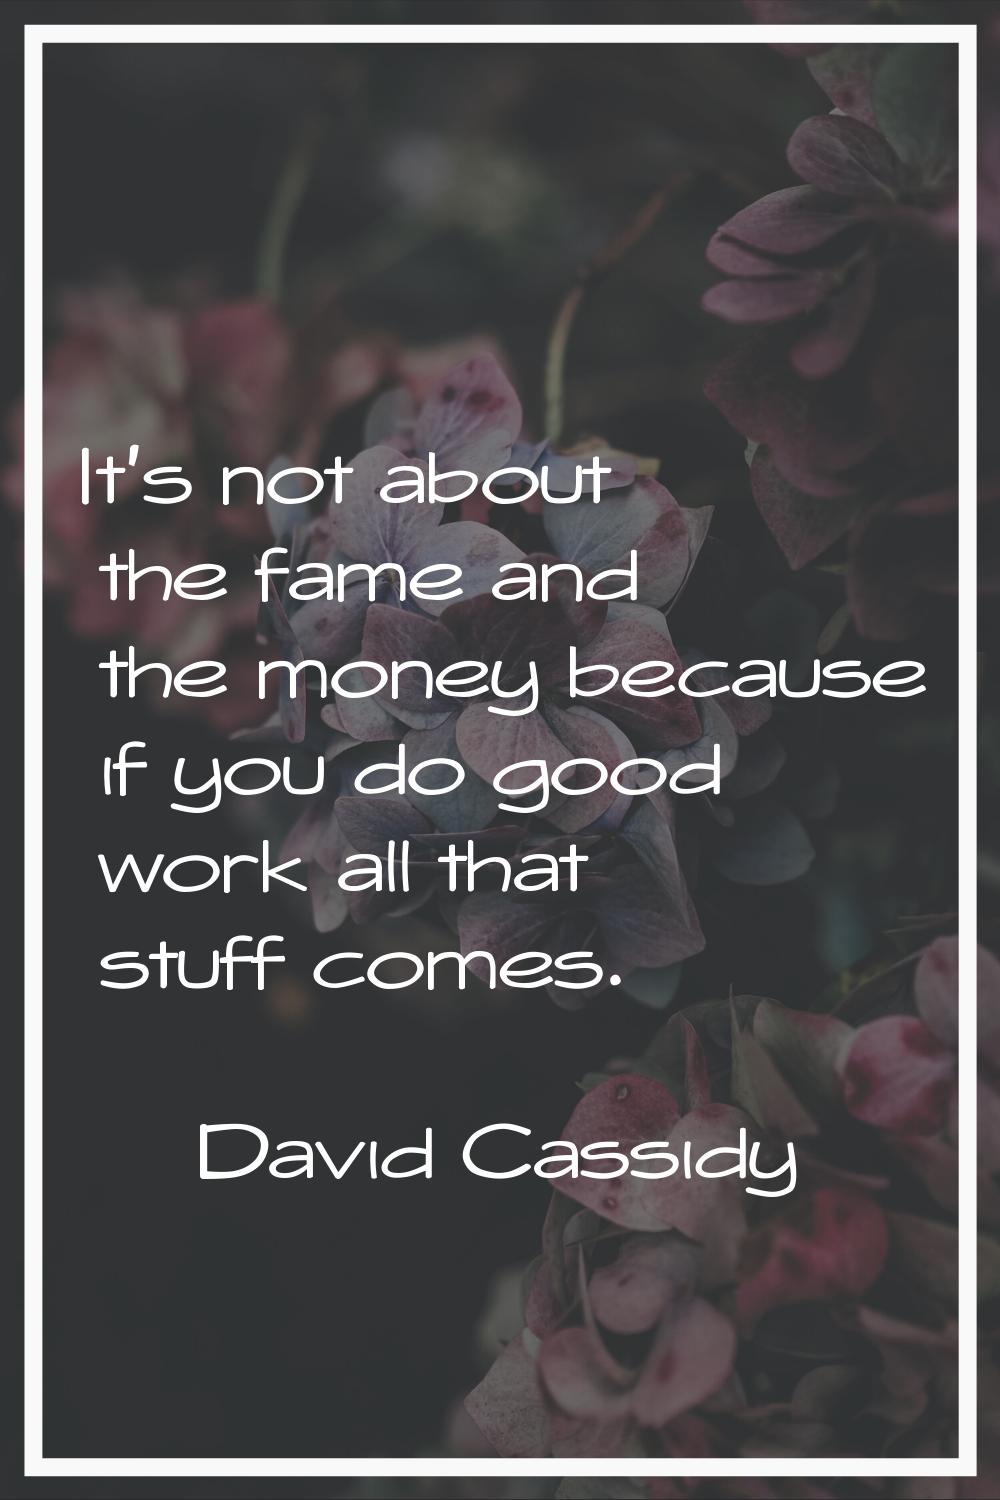 It's not about the fame and the money because if you do good work all that stuff comes.